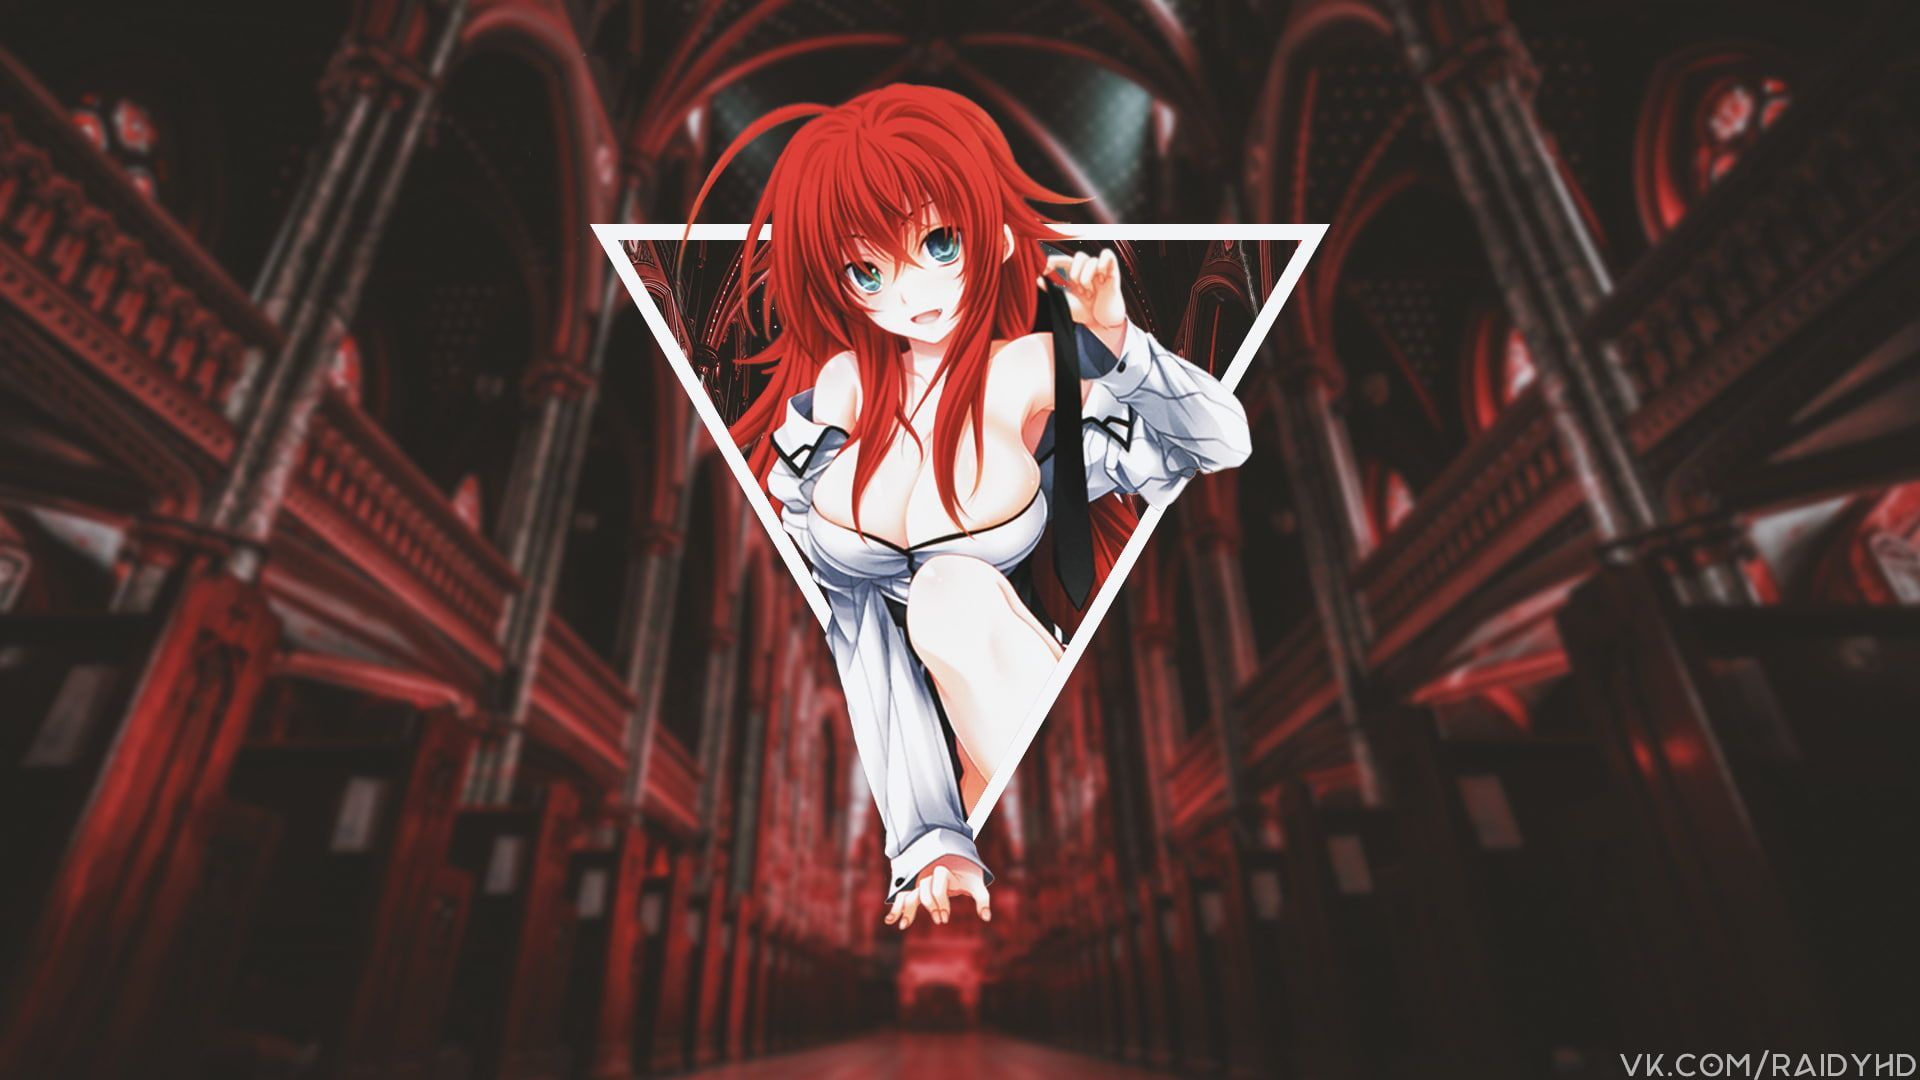 Anime Girls #anime #picture In Picture Gremory Rias Highschool DxD